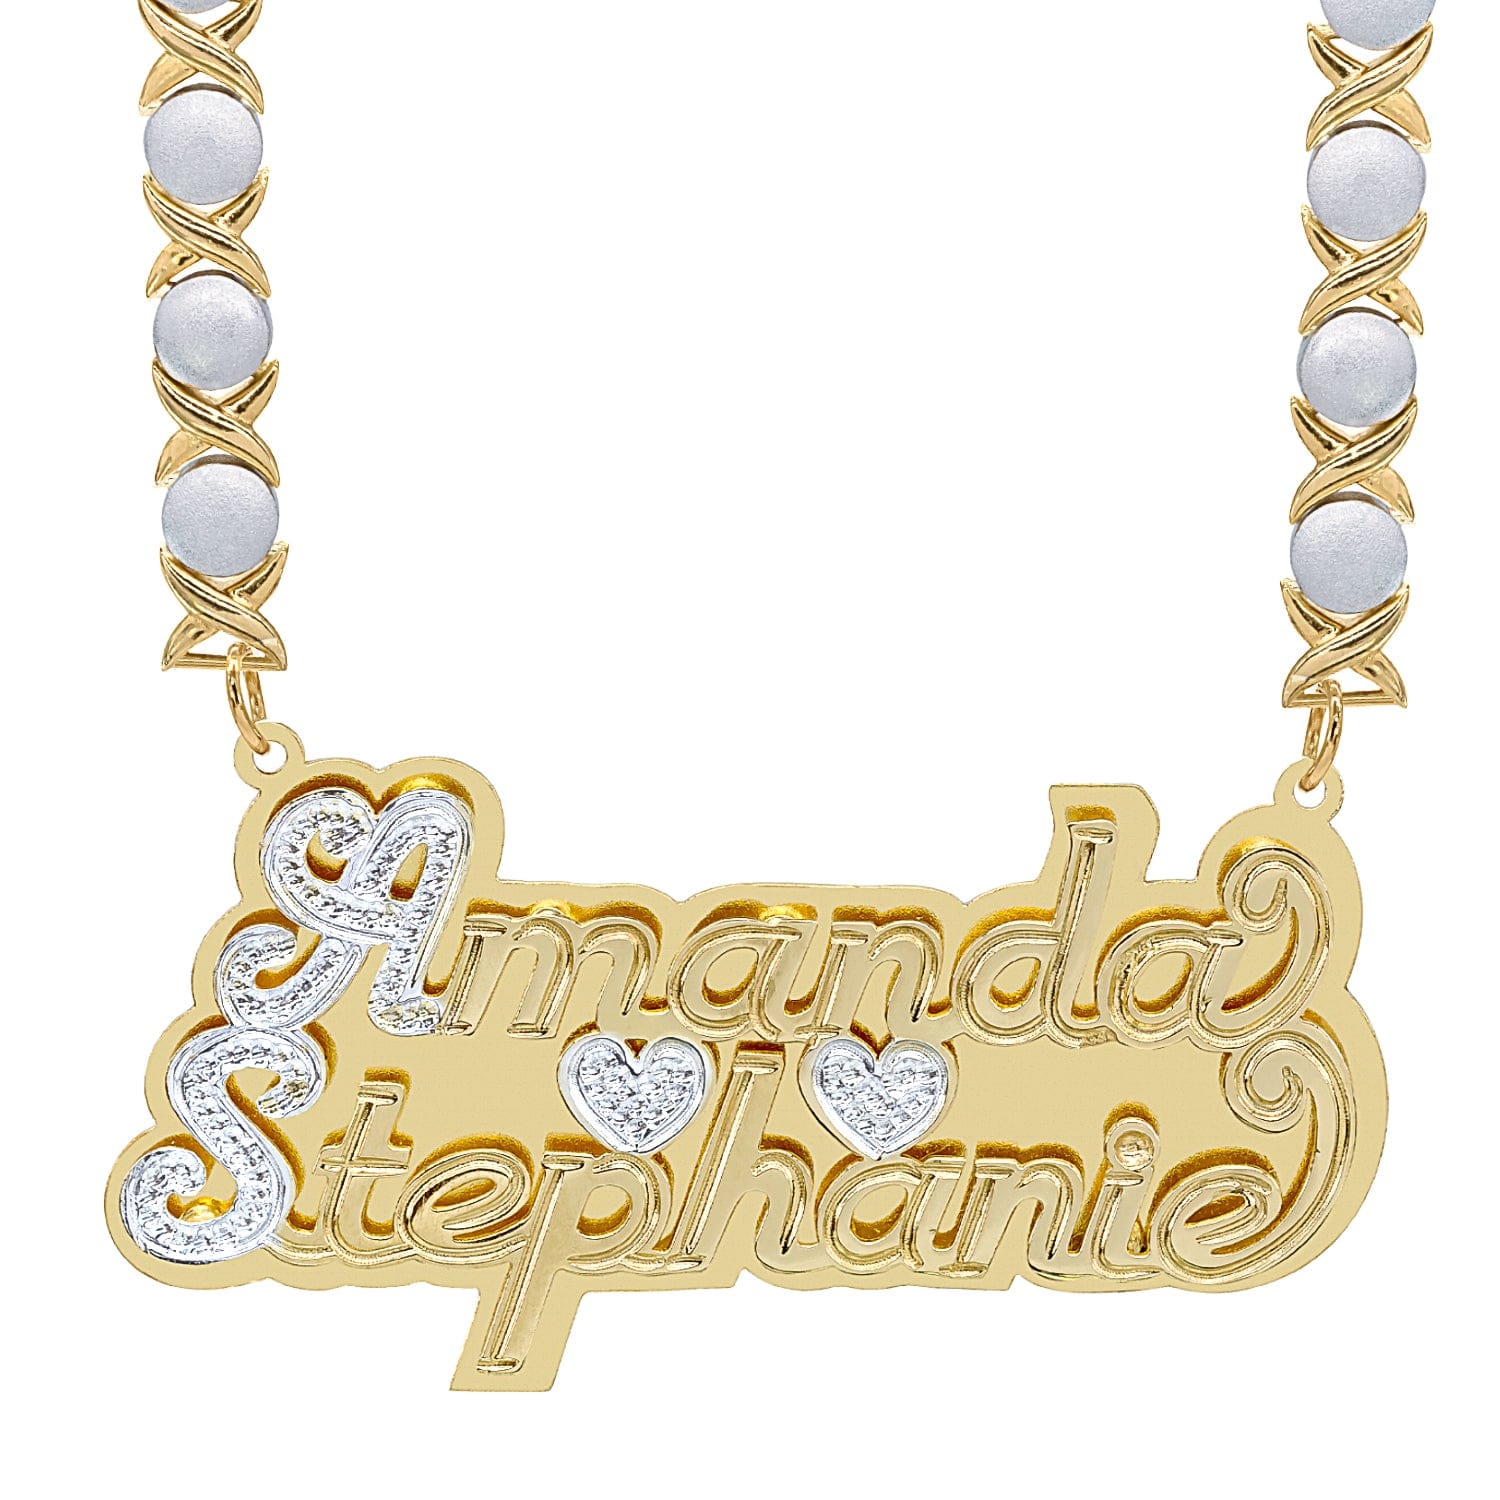 14k Gold over Sterling Silver / Rhodium Xoxo Chain Double Plated Nameplate Necklace "Couples" with Rhodium Xoxo Chain